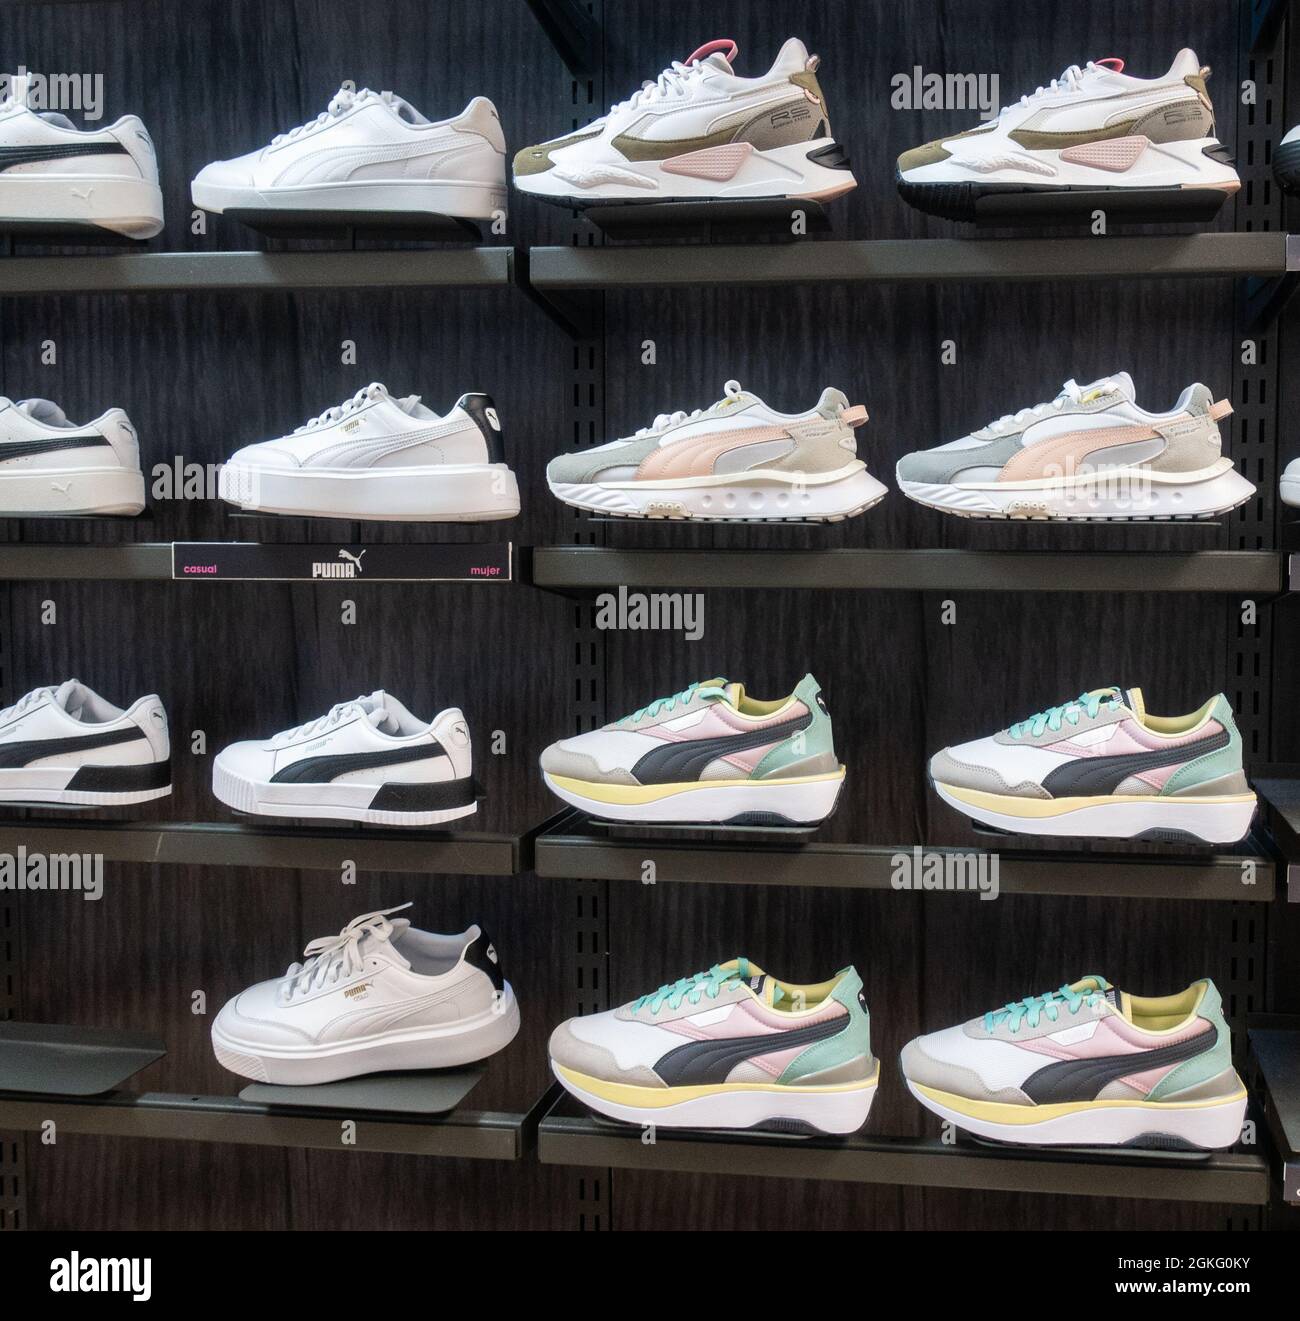 Puma footwear store hi-res photography images - Alamy